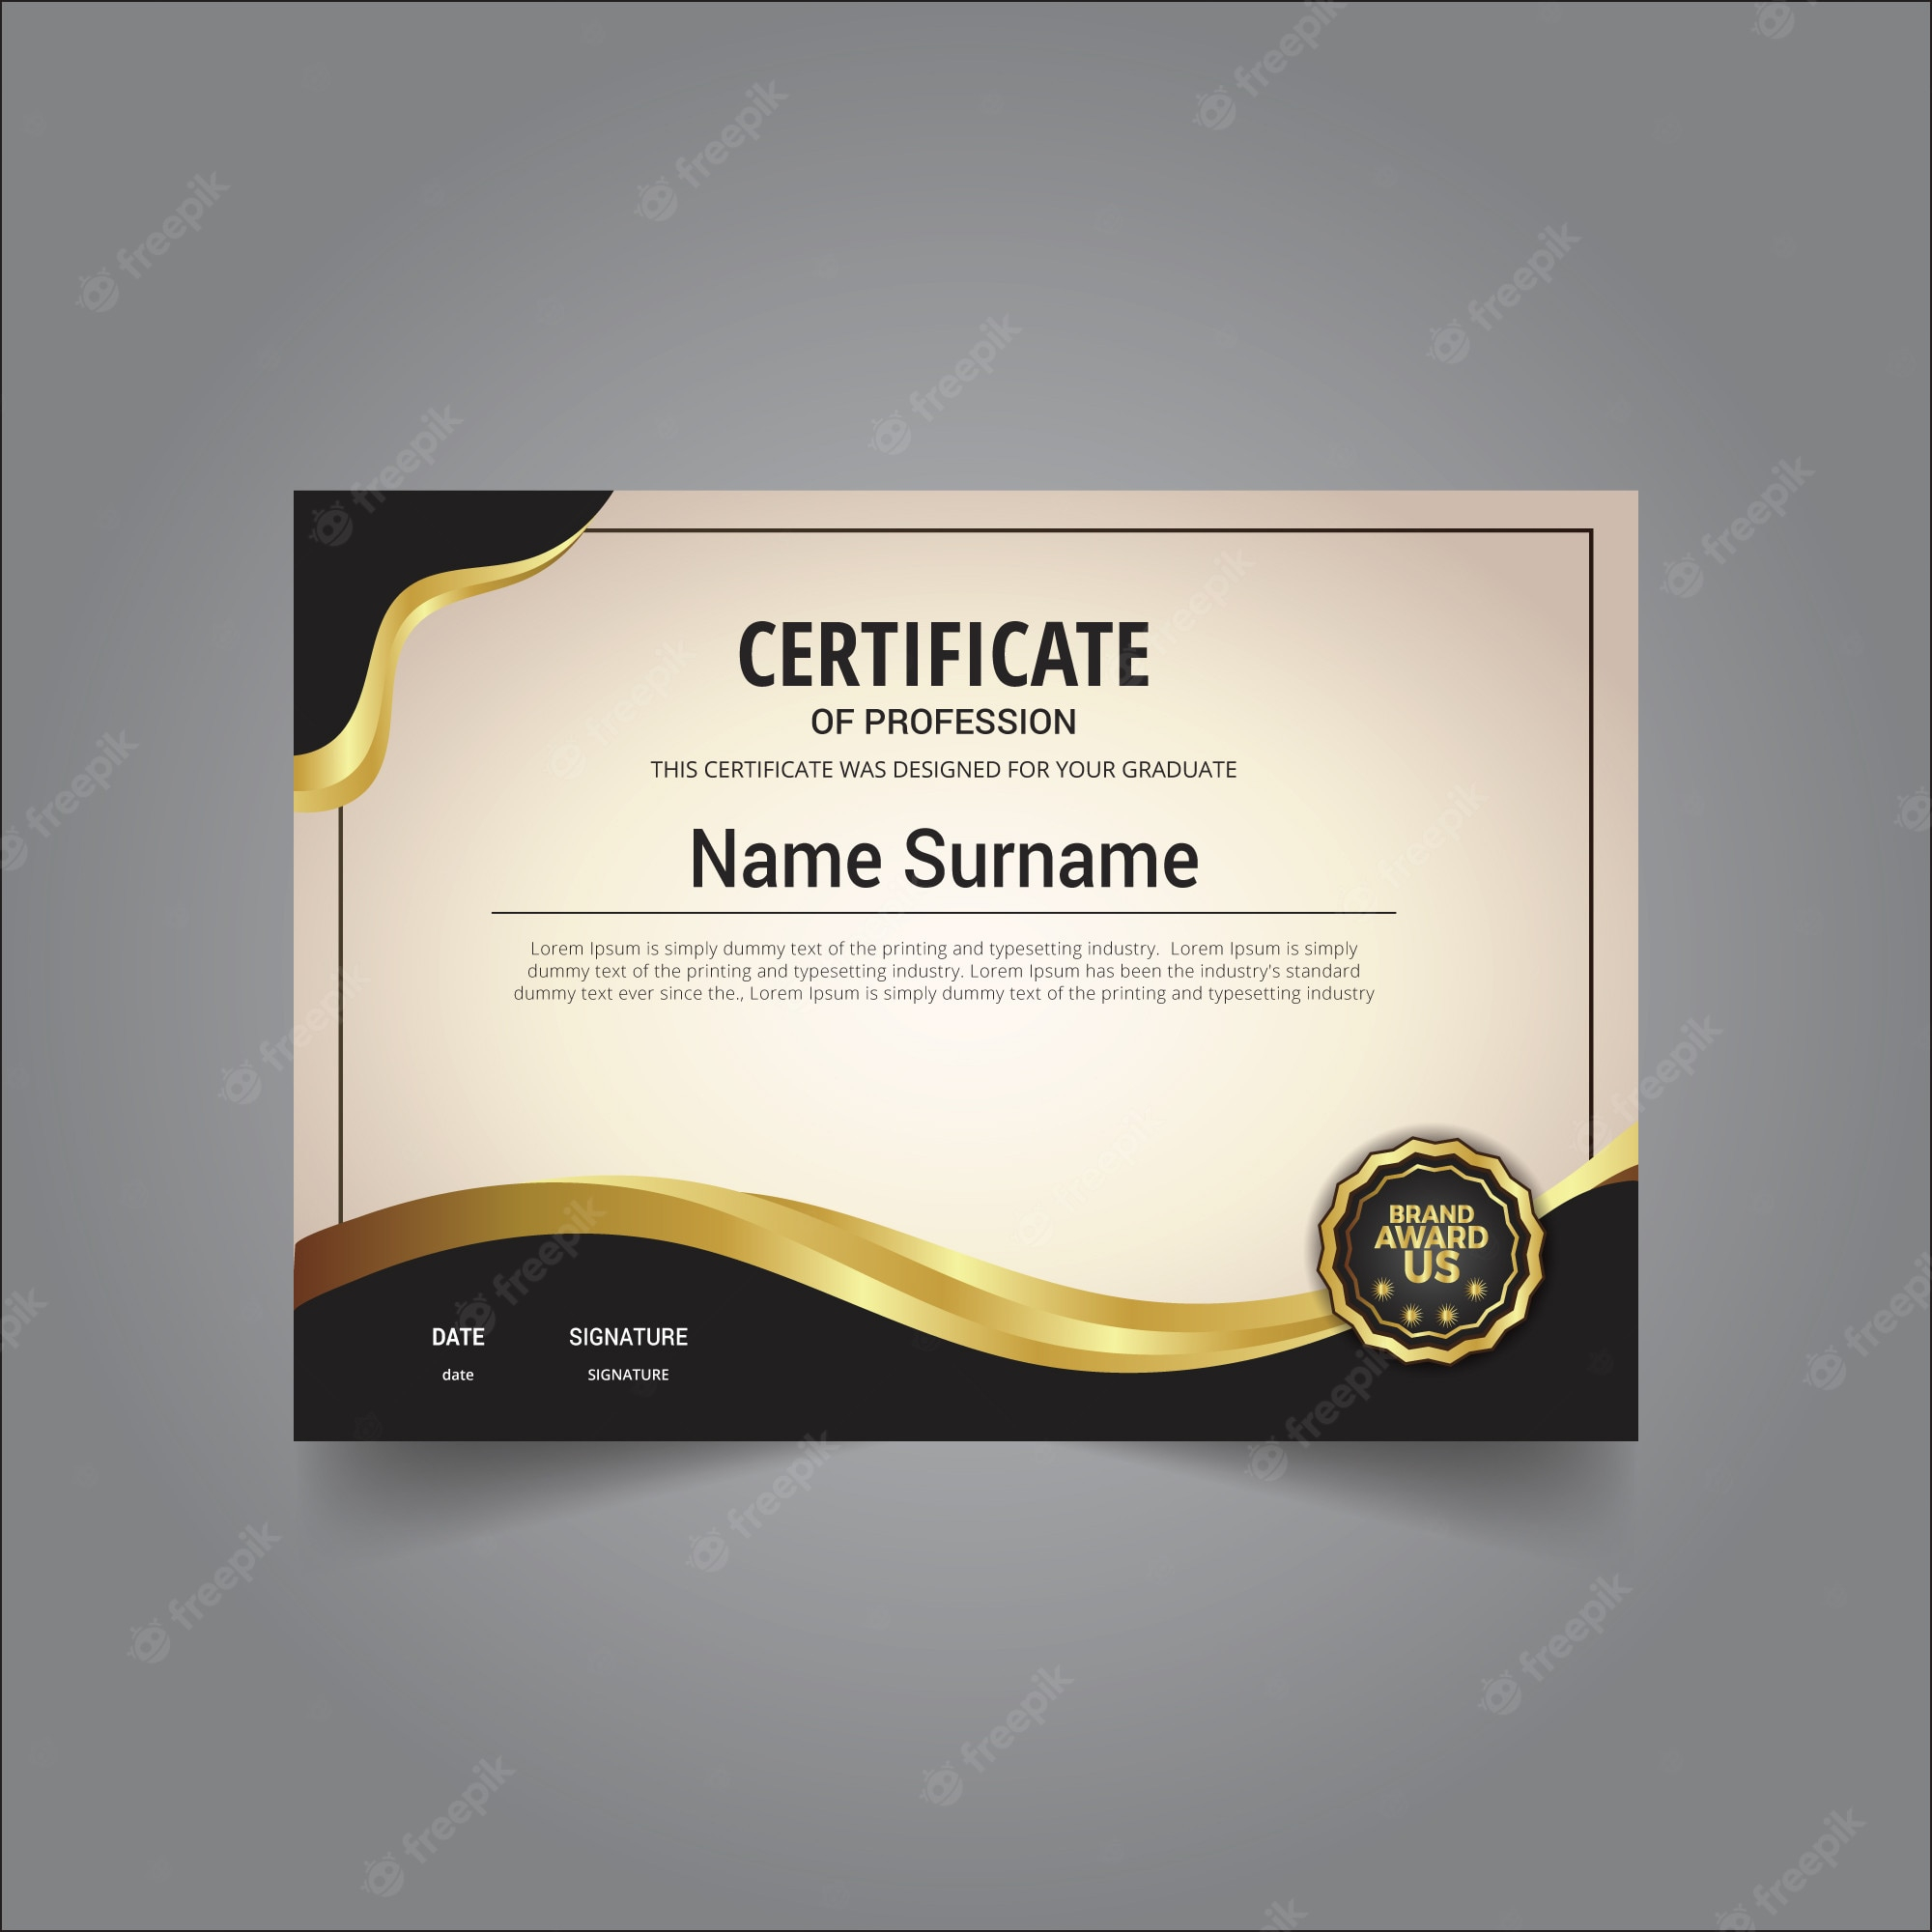 Certificate Indesign Images  Free Vectors, Stock Photos & PSD Throughout Indesign Certificate Template